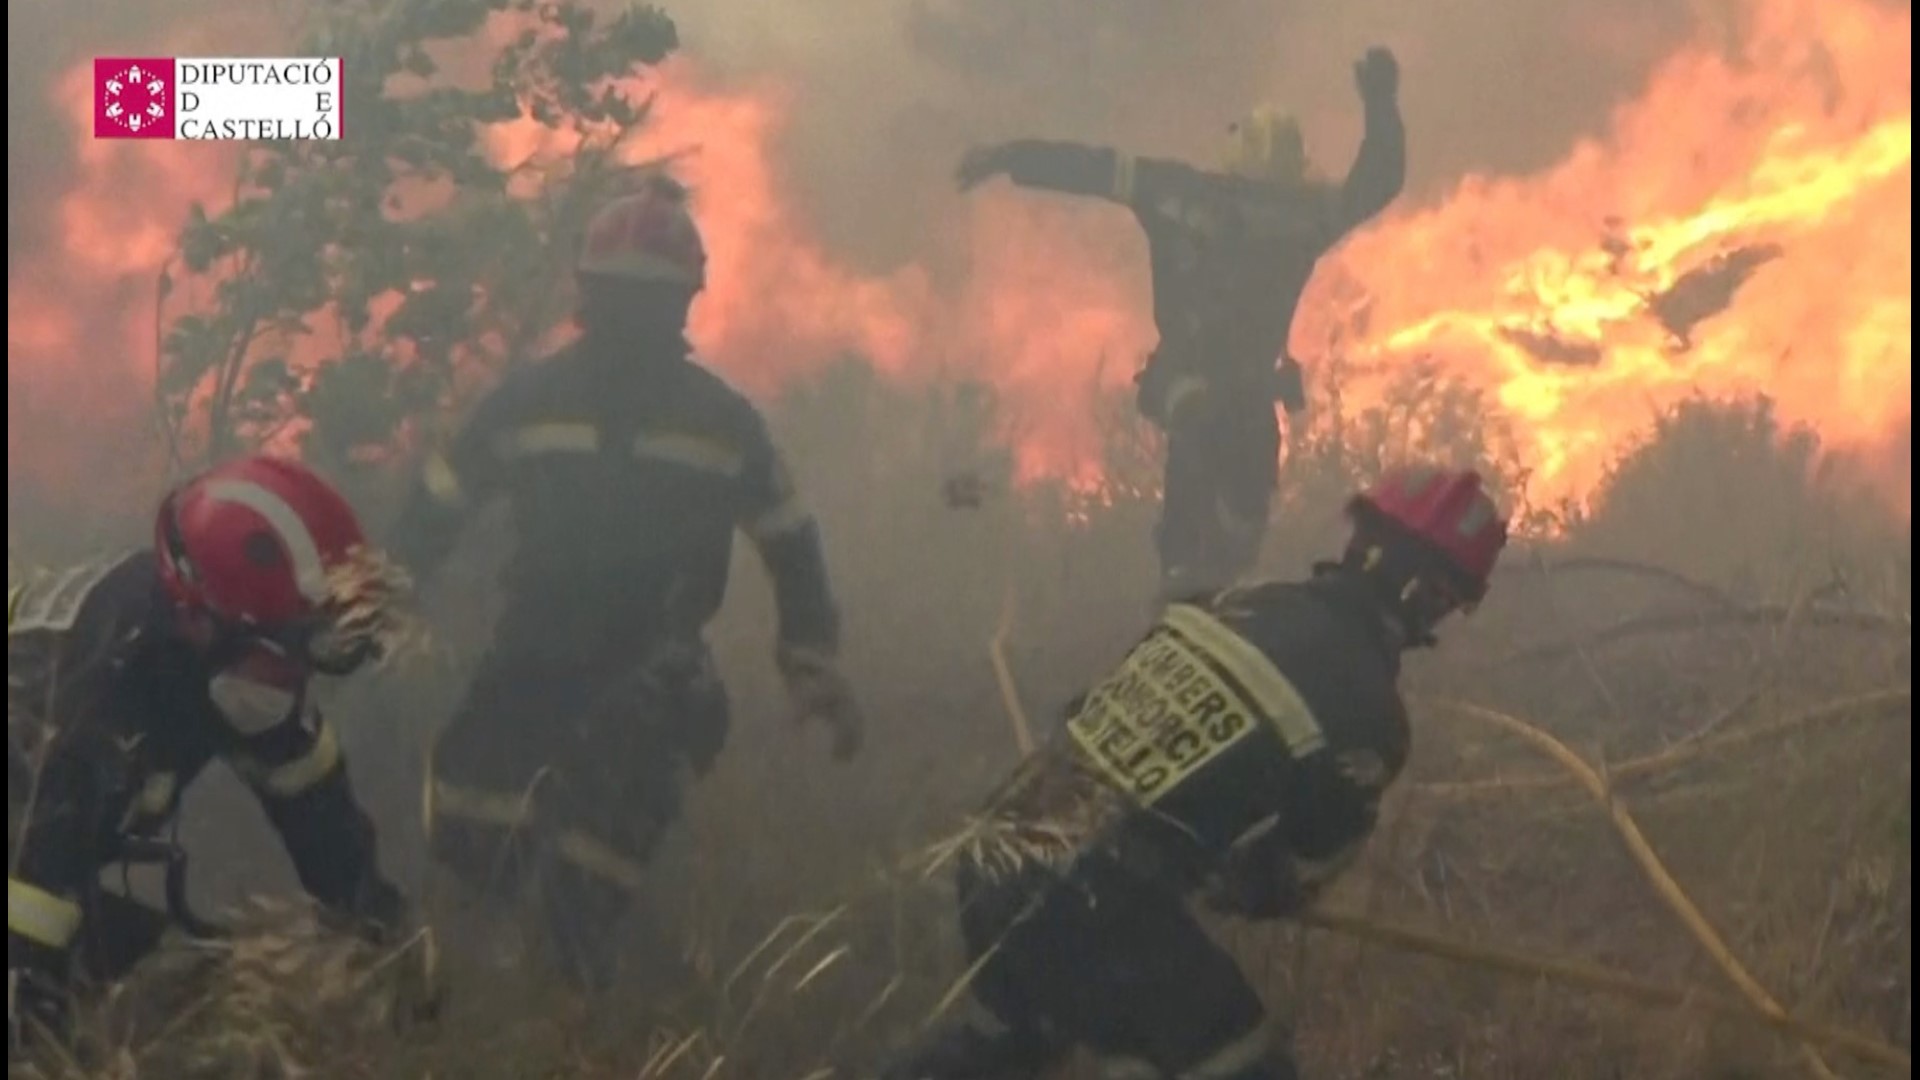 The Castello firefighters put their brave faces on as they scrambled to stop a wildfire that had forced the evacuation of the villages Teresa and Toras. Veuer's Maria Mercedes Galuppo has the story.